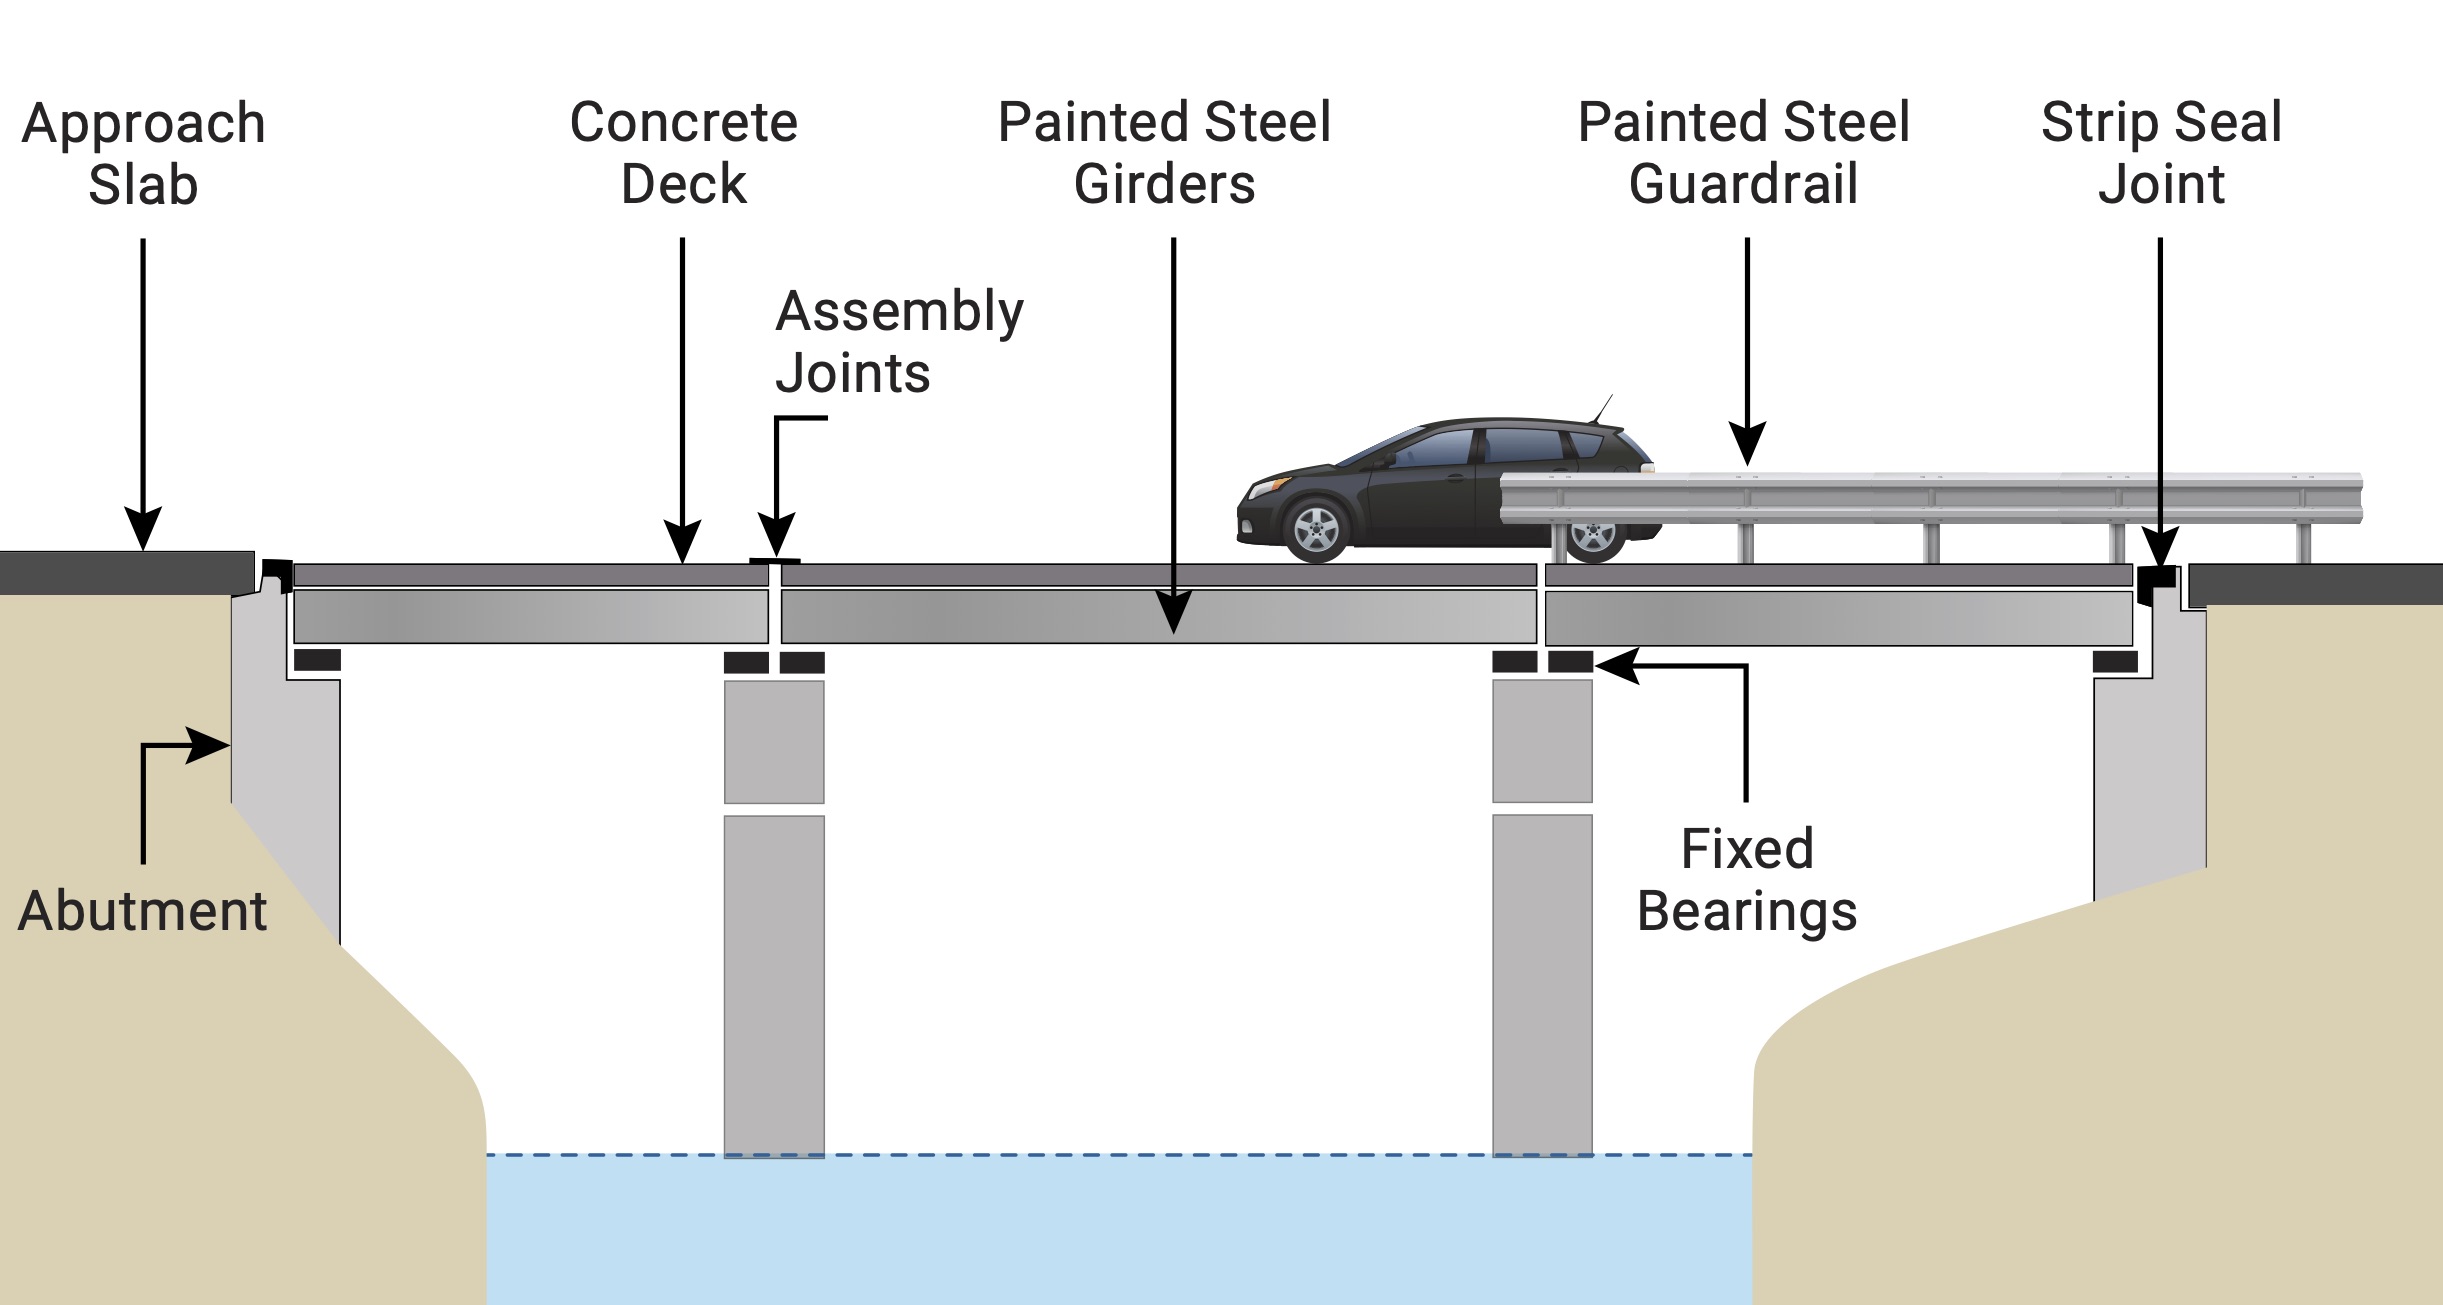 structural elements listed are: approach slab, abutment, concrete deck, assembly joints, painted steel girders, fixed bearings, painted steel guardrail, and strip seal joint